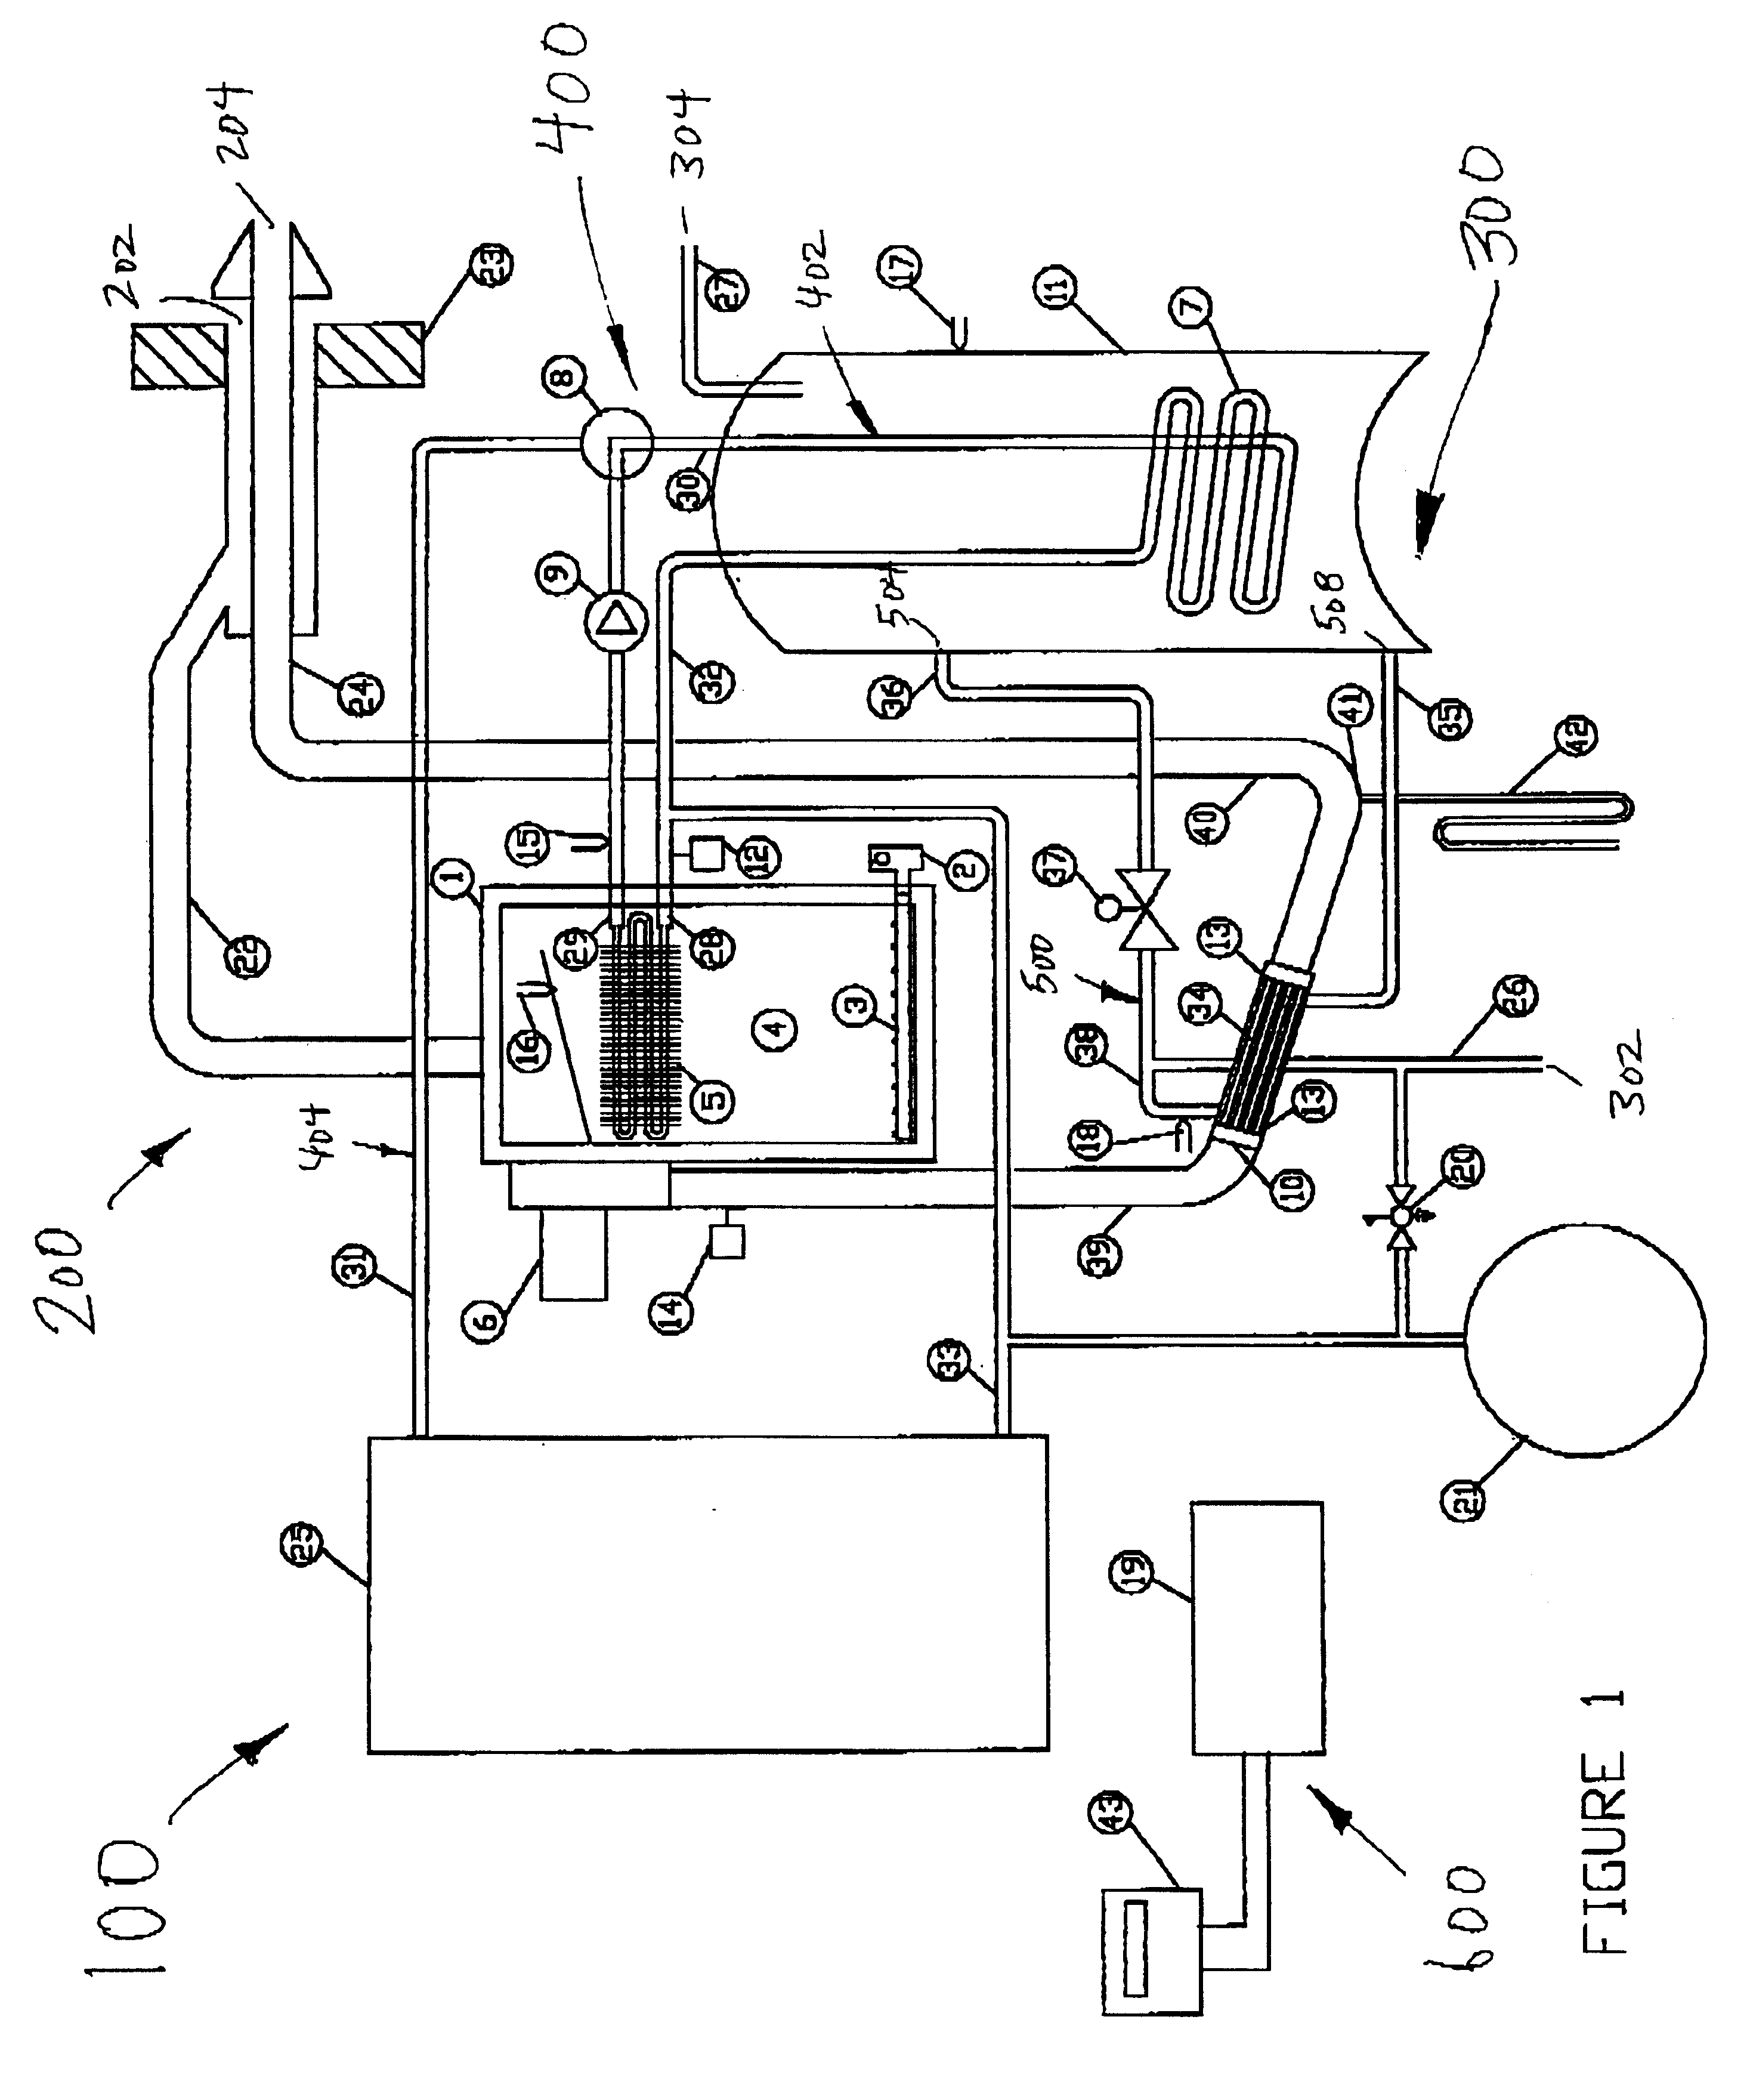 Water heating apparatus with sensible and latent heat recovery